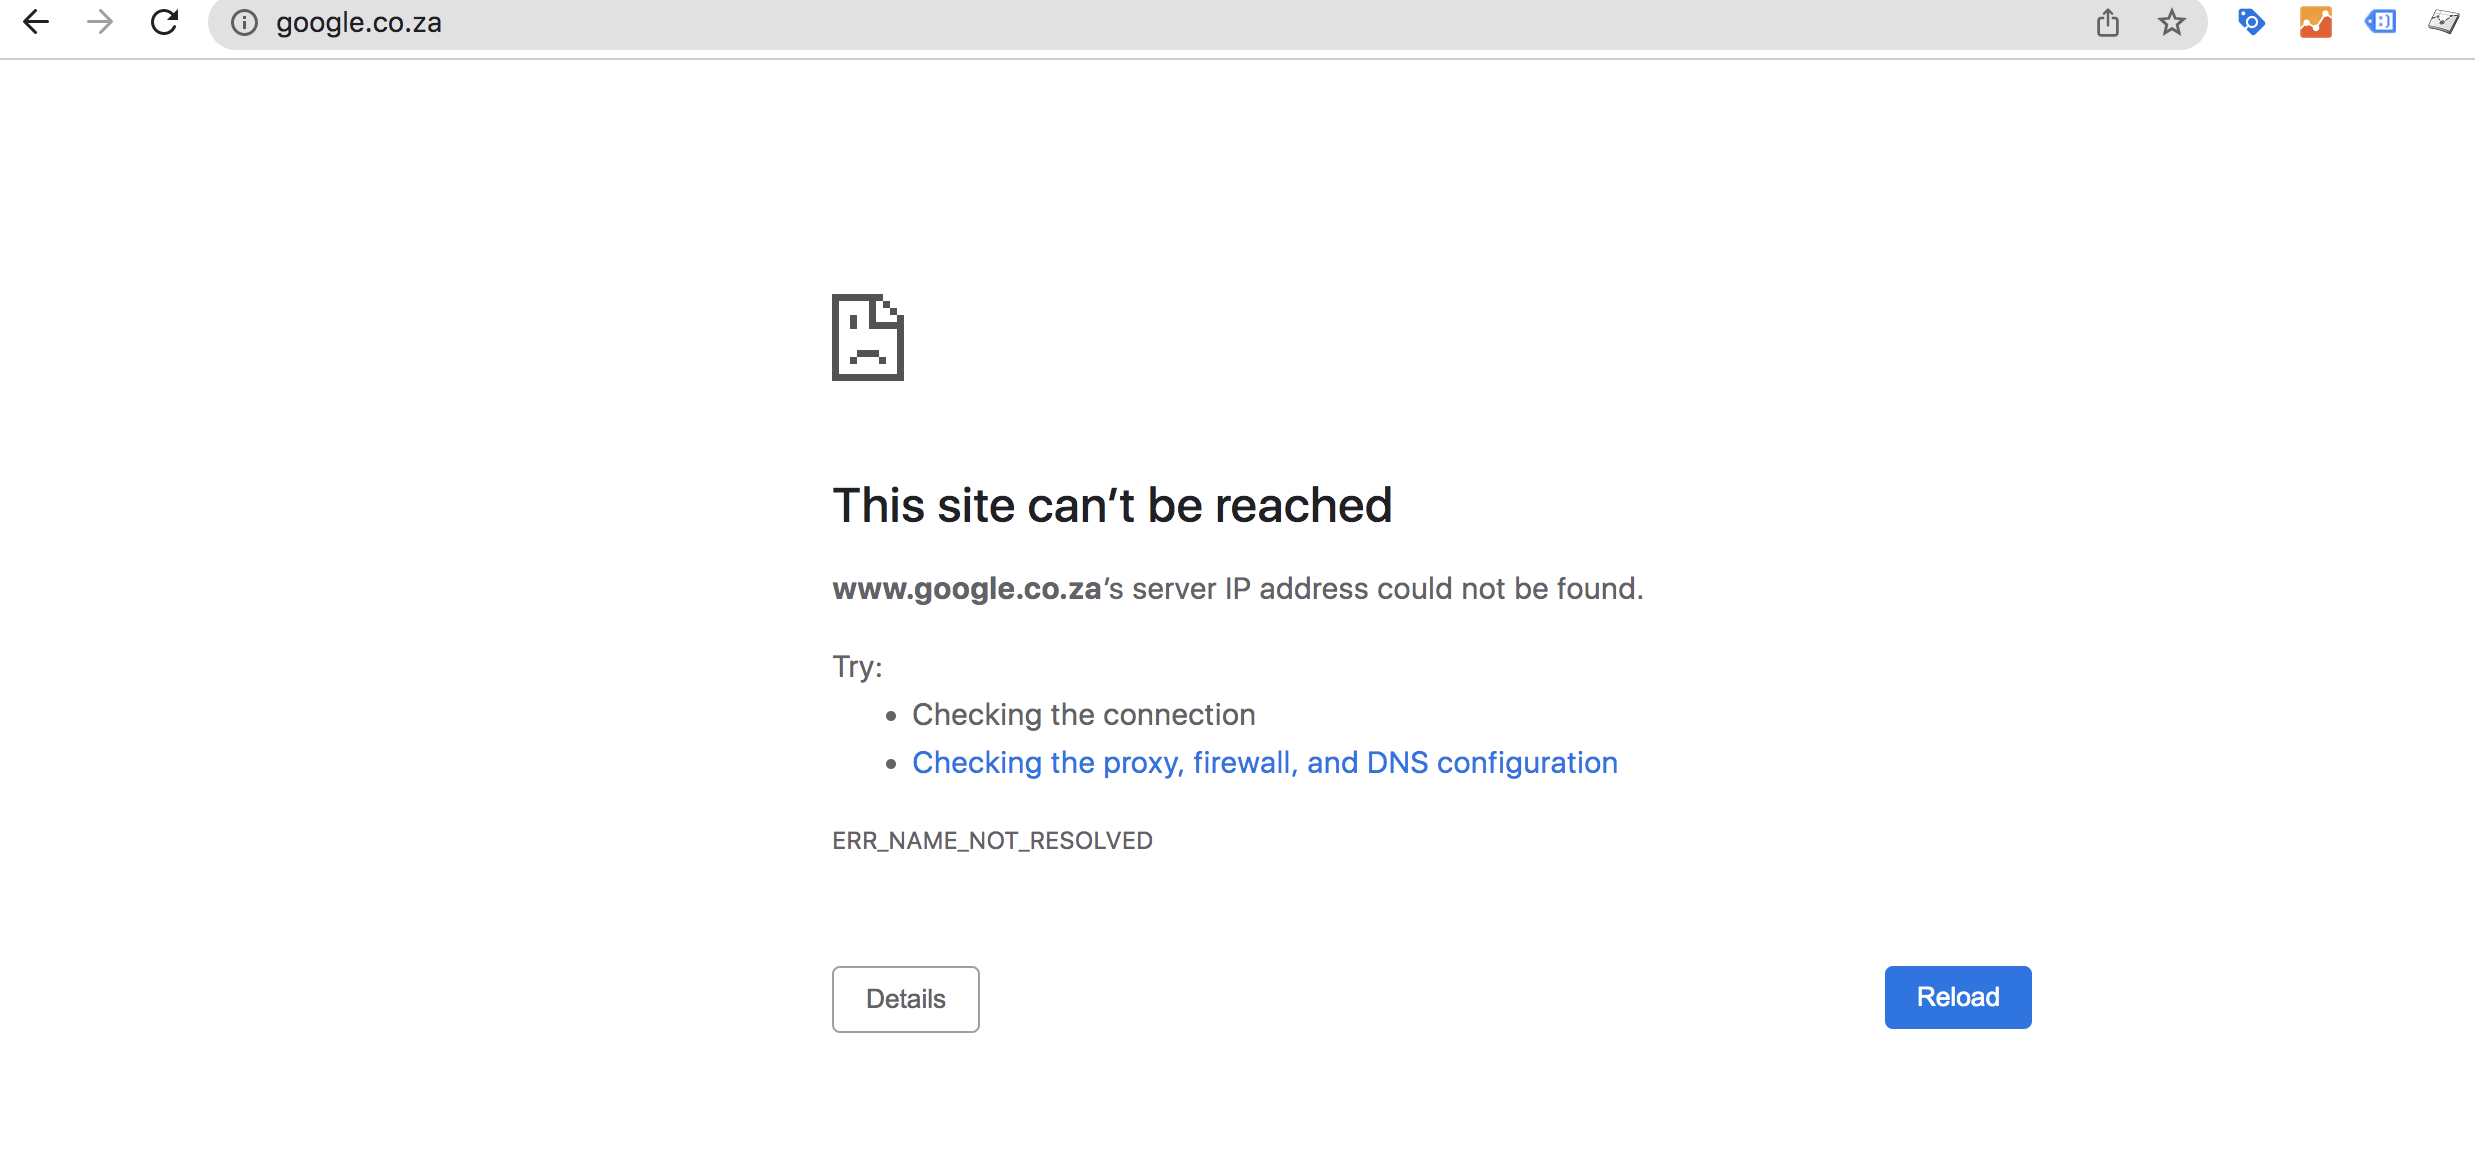 Google.co.za, the South African domain, is down